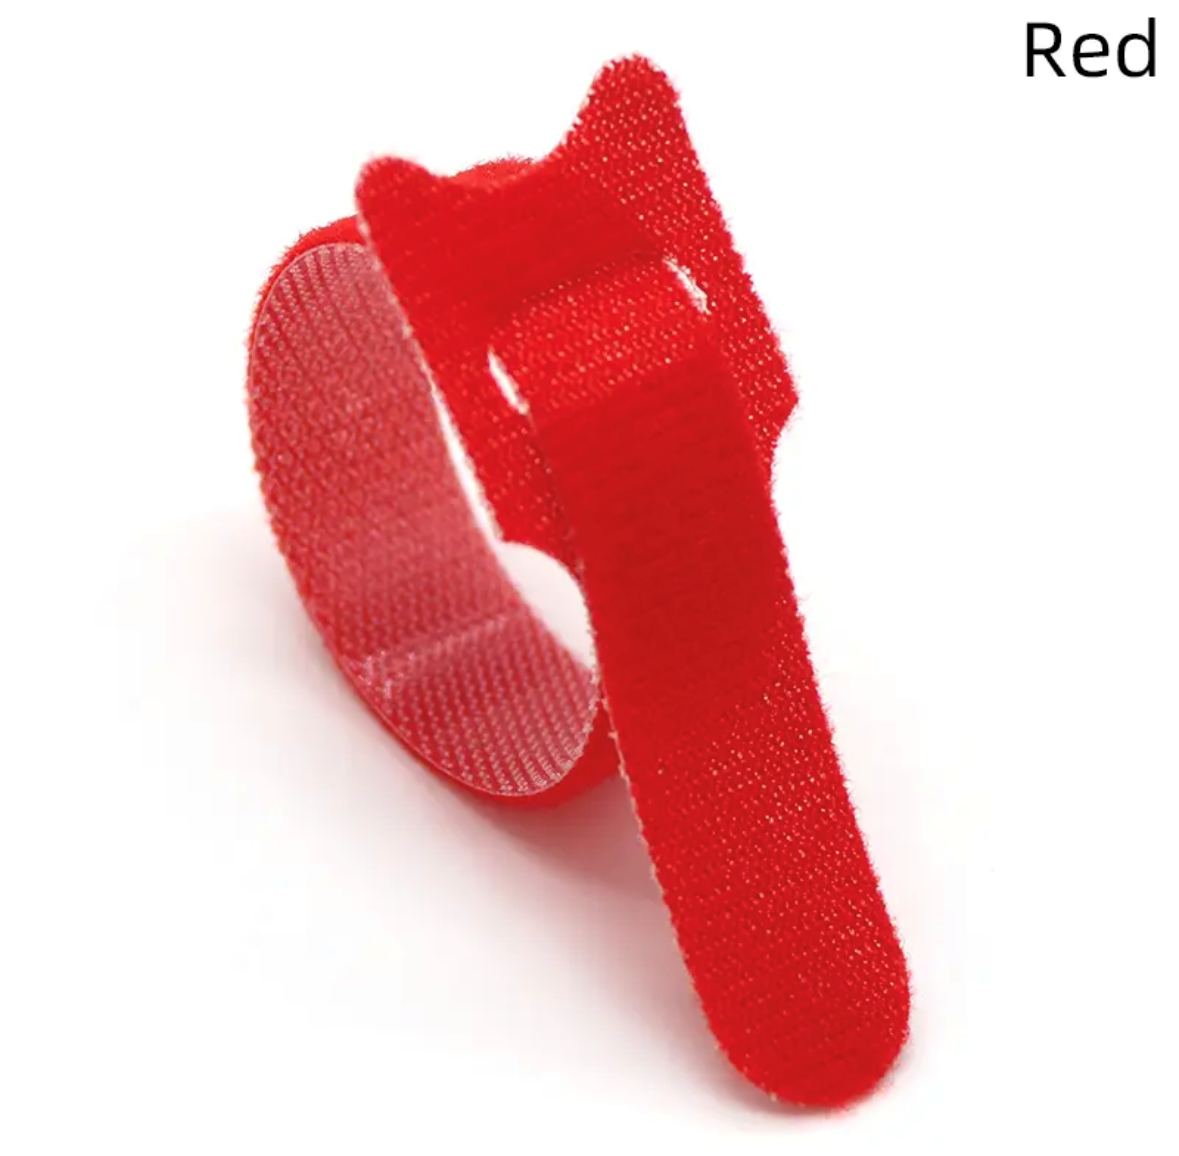 Re-usable Velcro cable ties 10mm Wide * 150mm Long